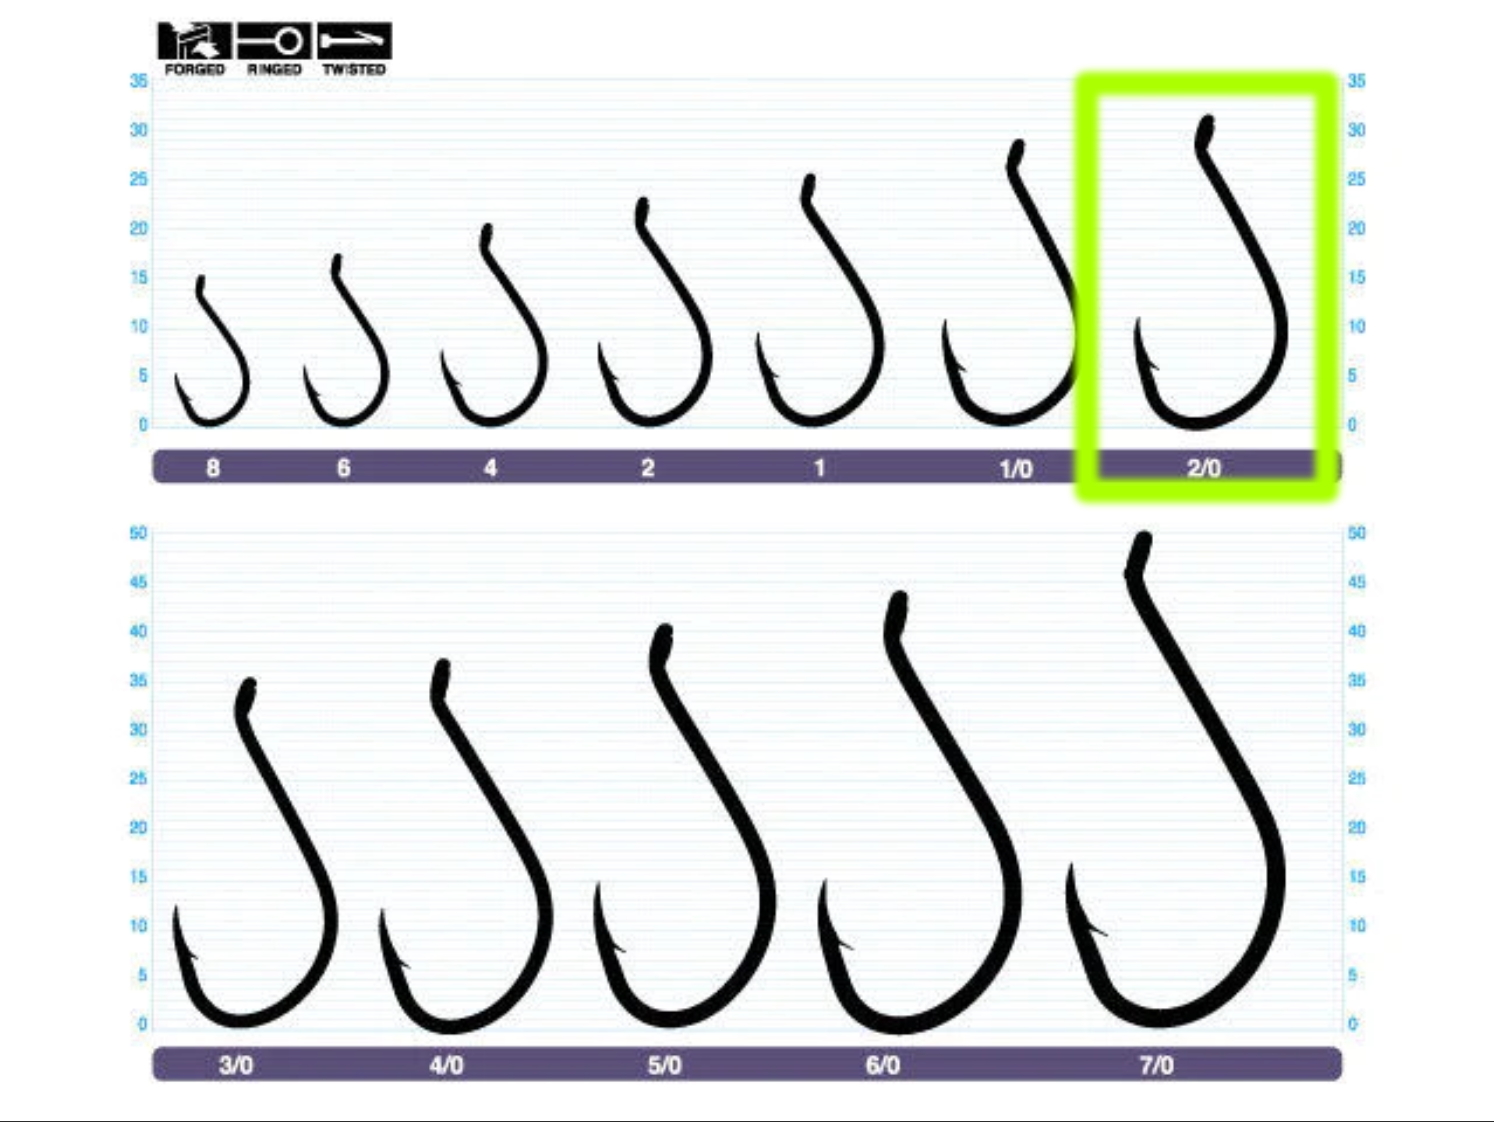 Buy Owner Mutu Light Wire Tournament Circle Hooks Bulk Pack 3/0 Qty 28  online at